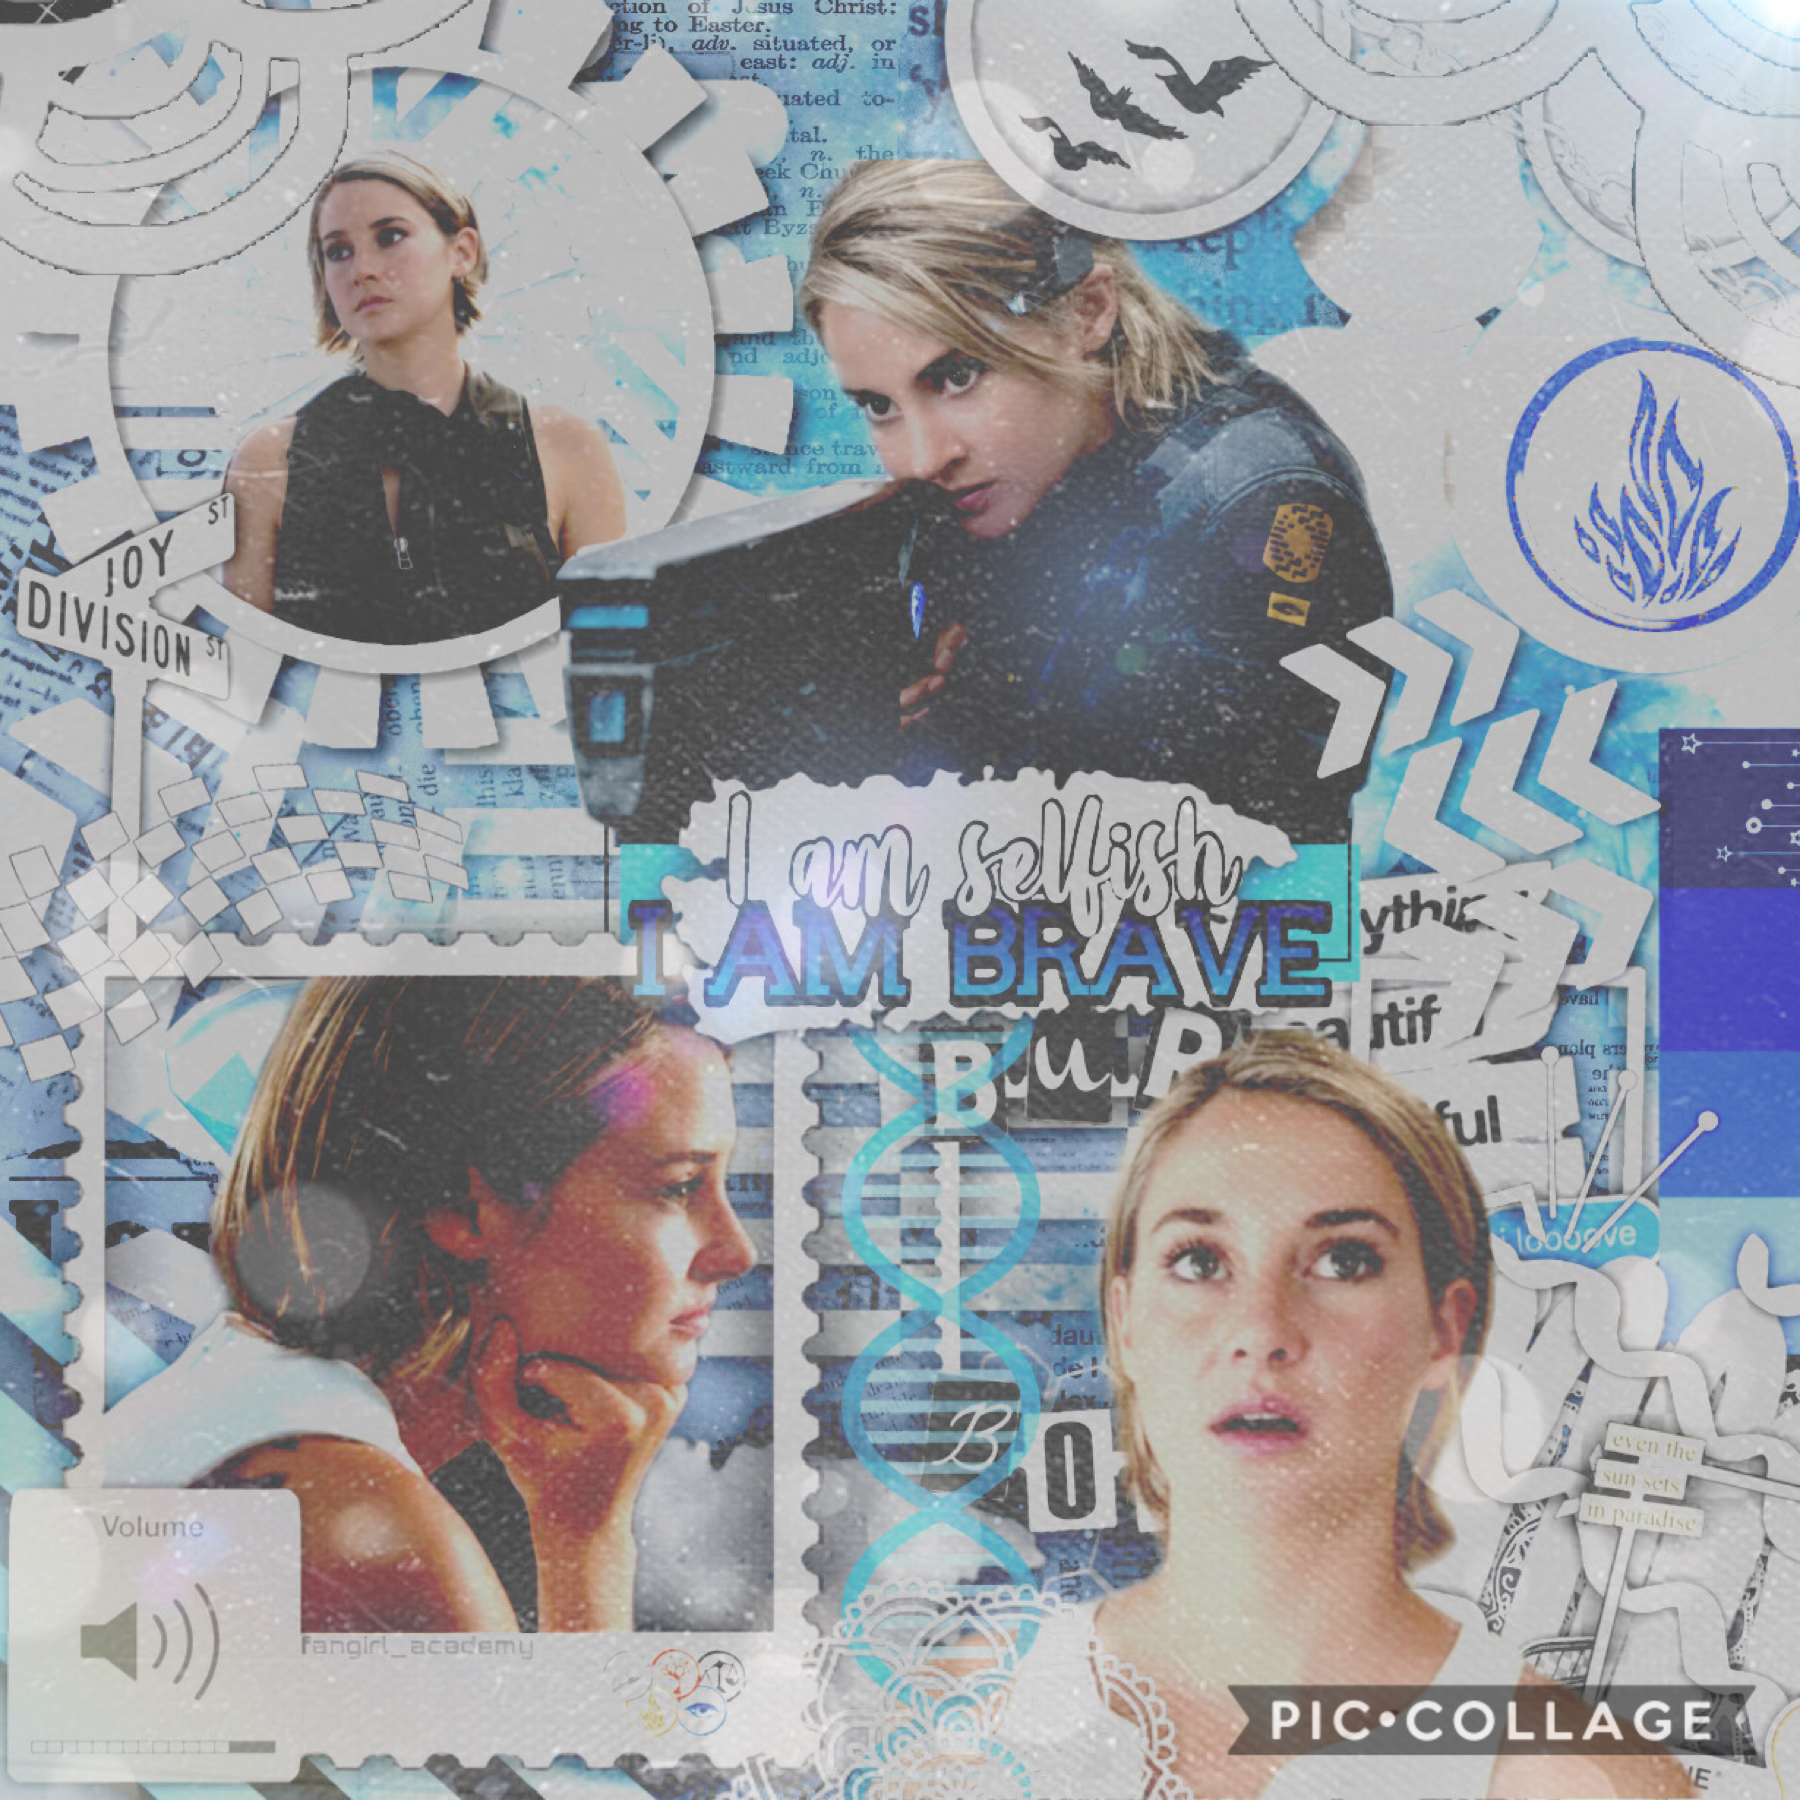 💎Made on PicsArt💎  Hey guys!! Tbh I’m so proud of this I had to share it with y’all! Please tell me what you think!!
QOTD: Favorite Divergent book?
AOTD: Divergent & Allegiant (though we don’t speak of the ending) 

💙Much love!💙